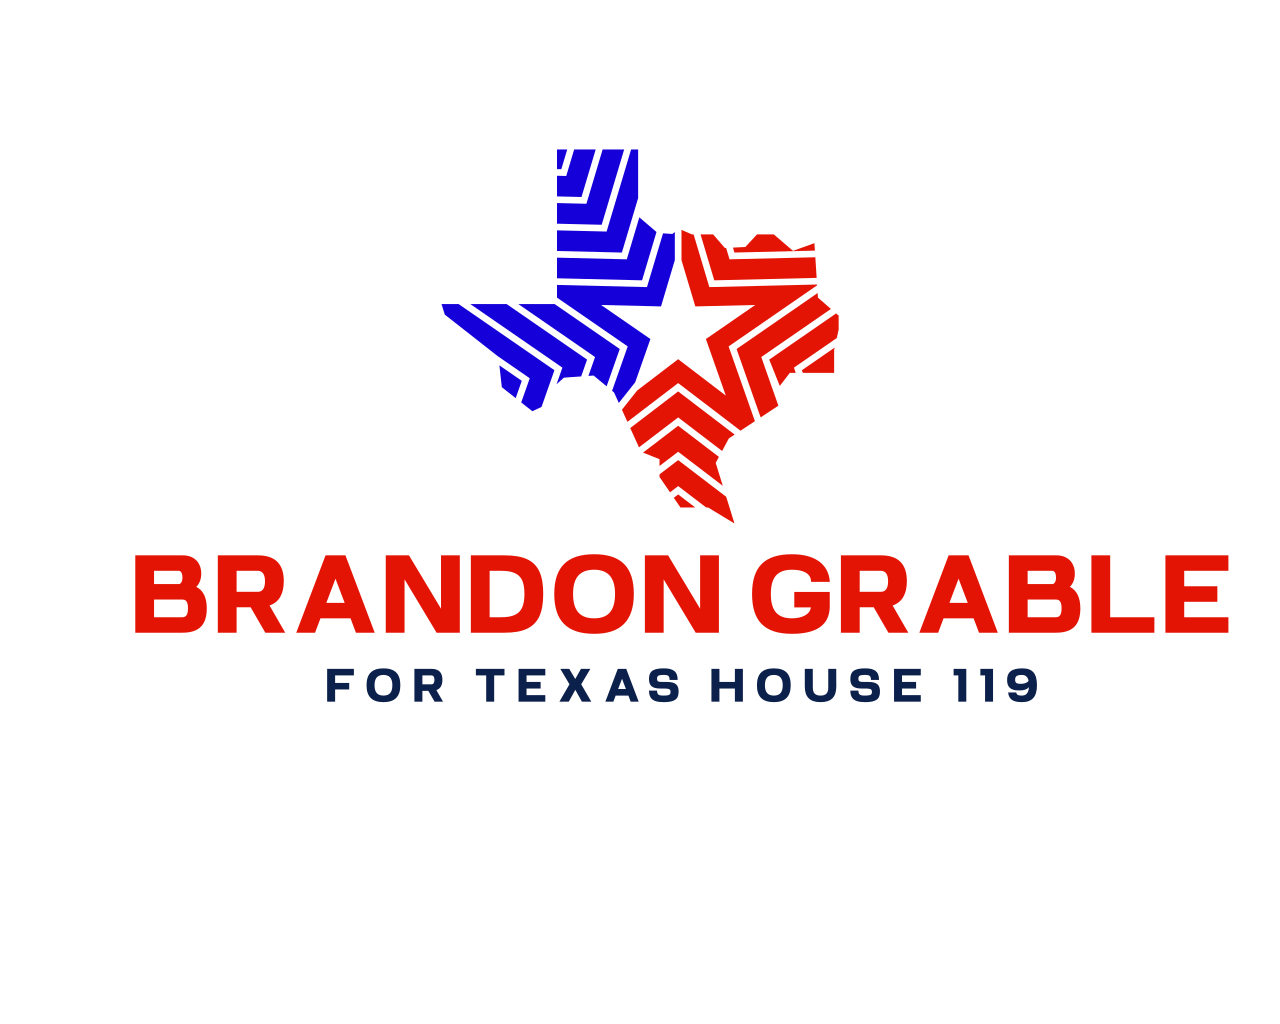 Grable for Texas House 119